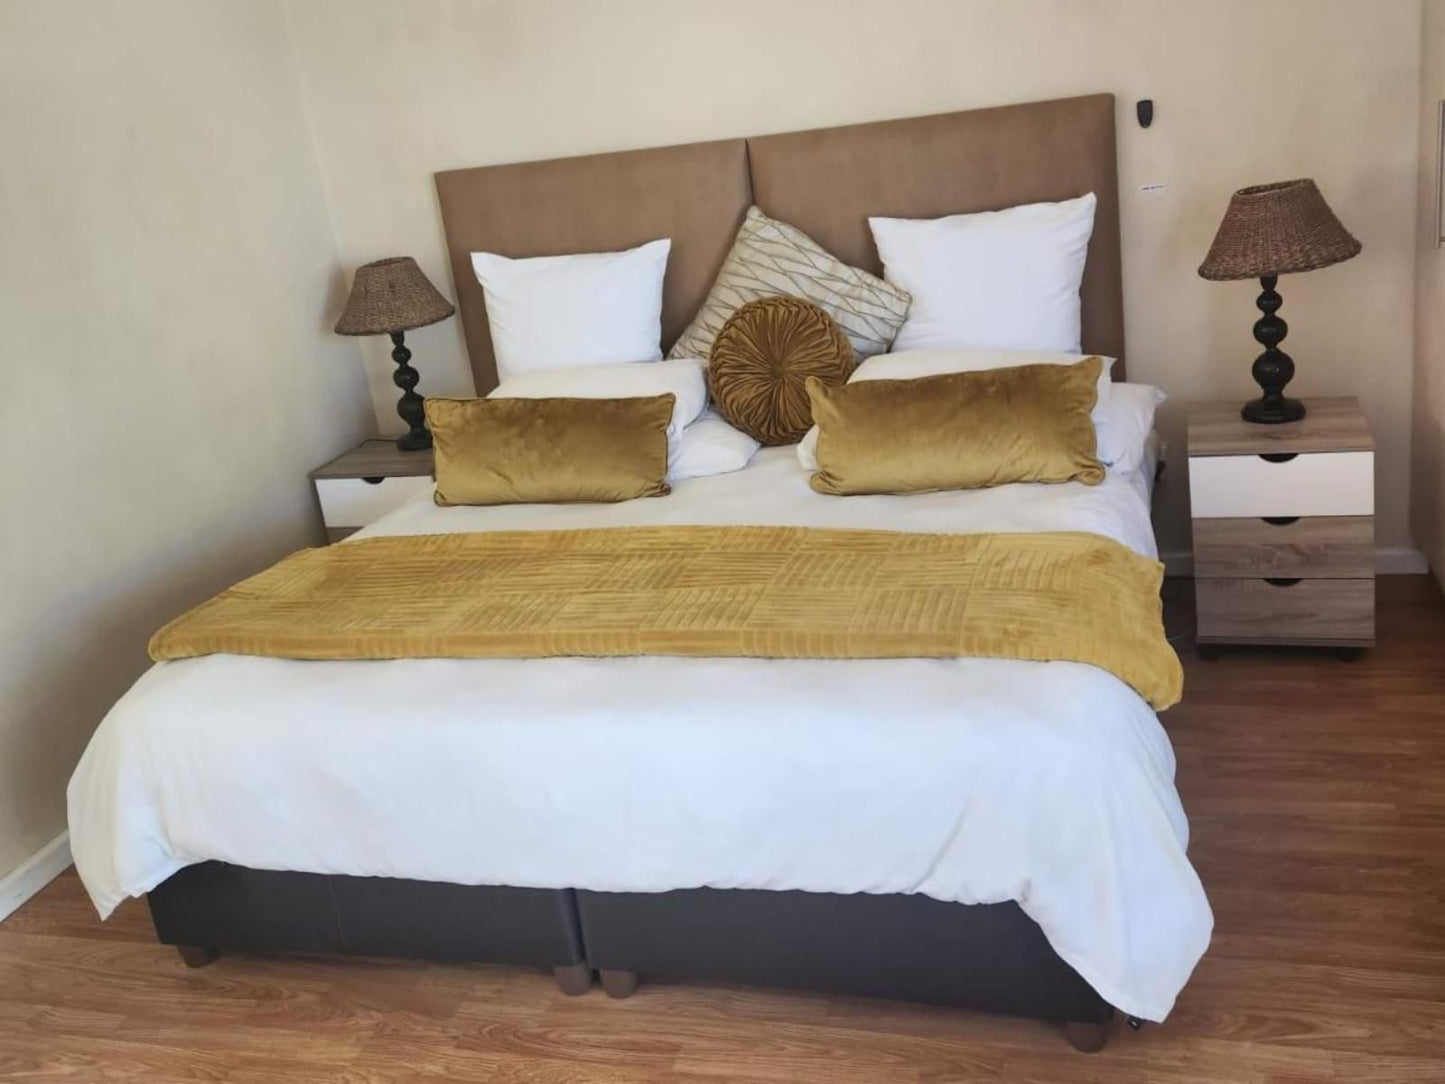 Jenvey House Self Catering Apartments Summerstrand Port Elizabeth Eastern Cape South Africa Bedroom